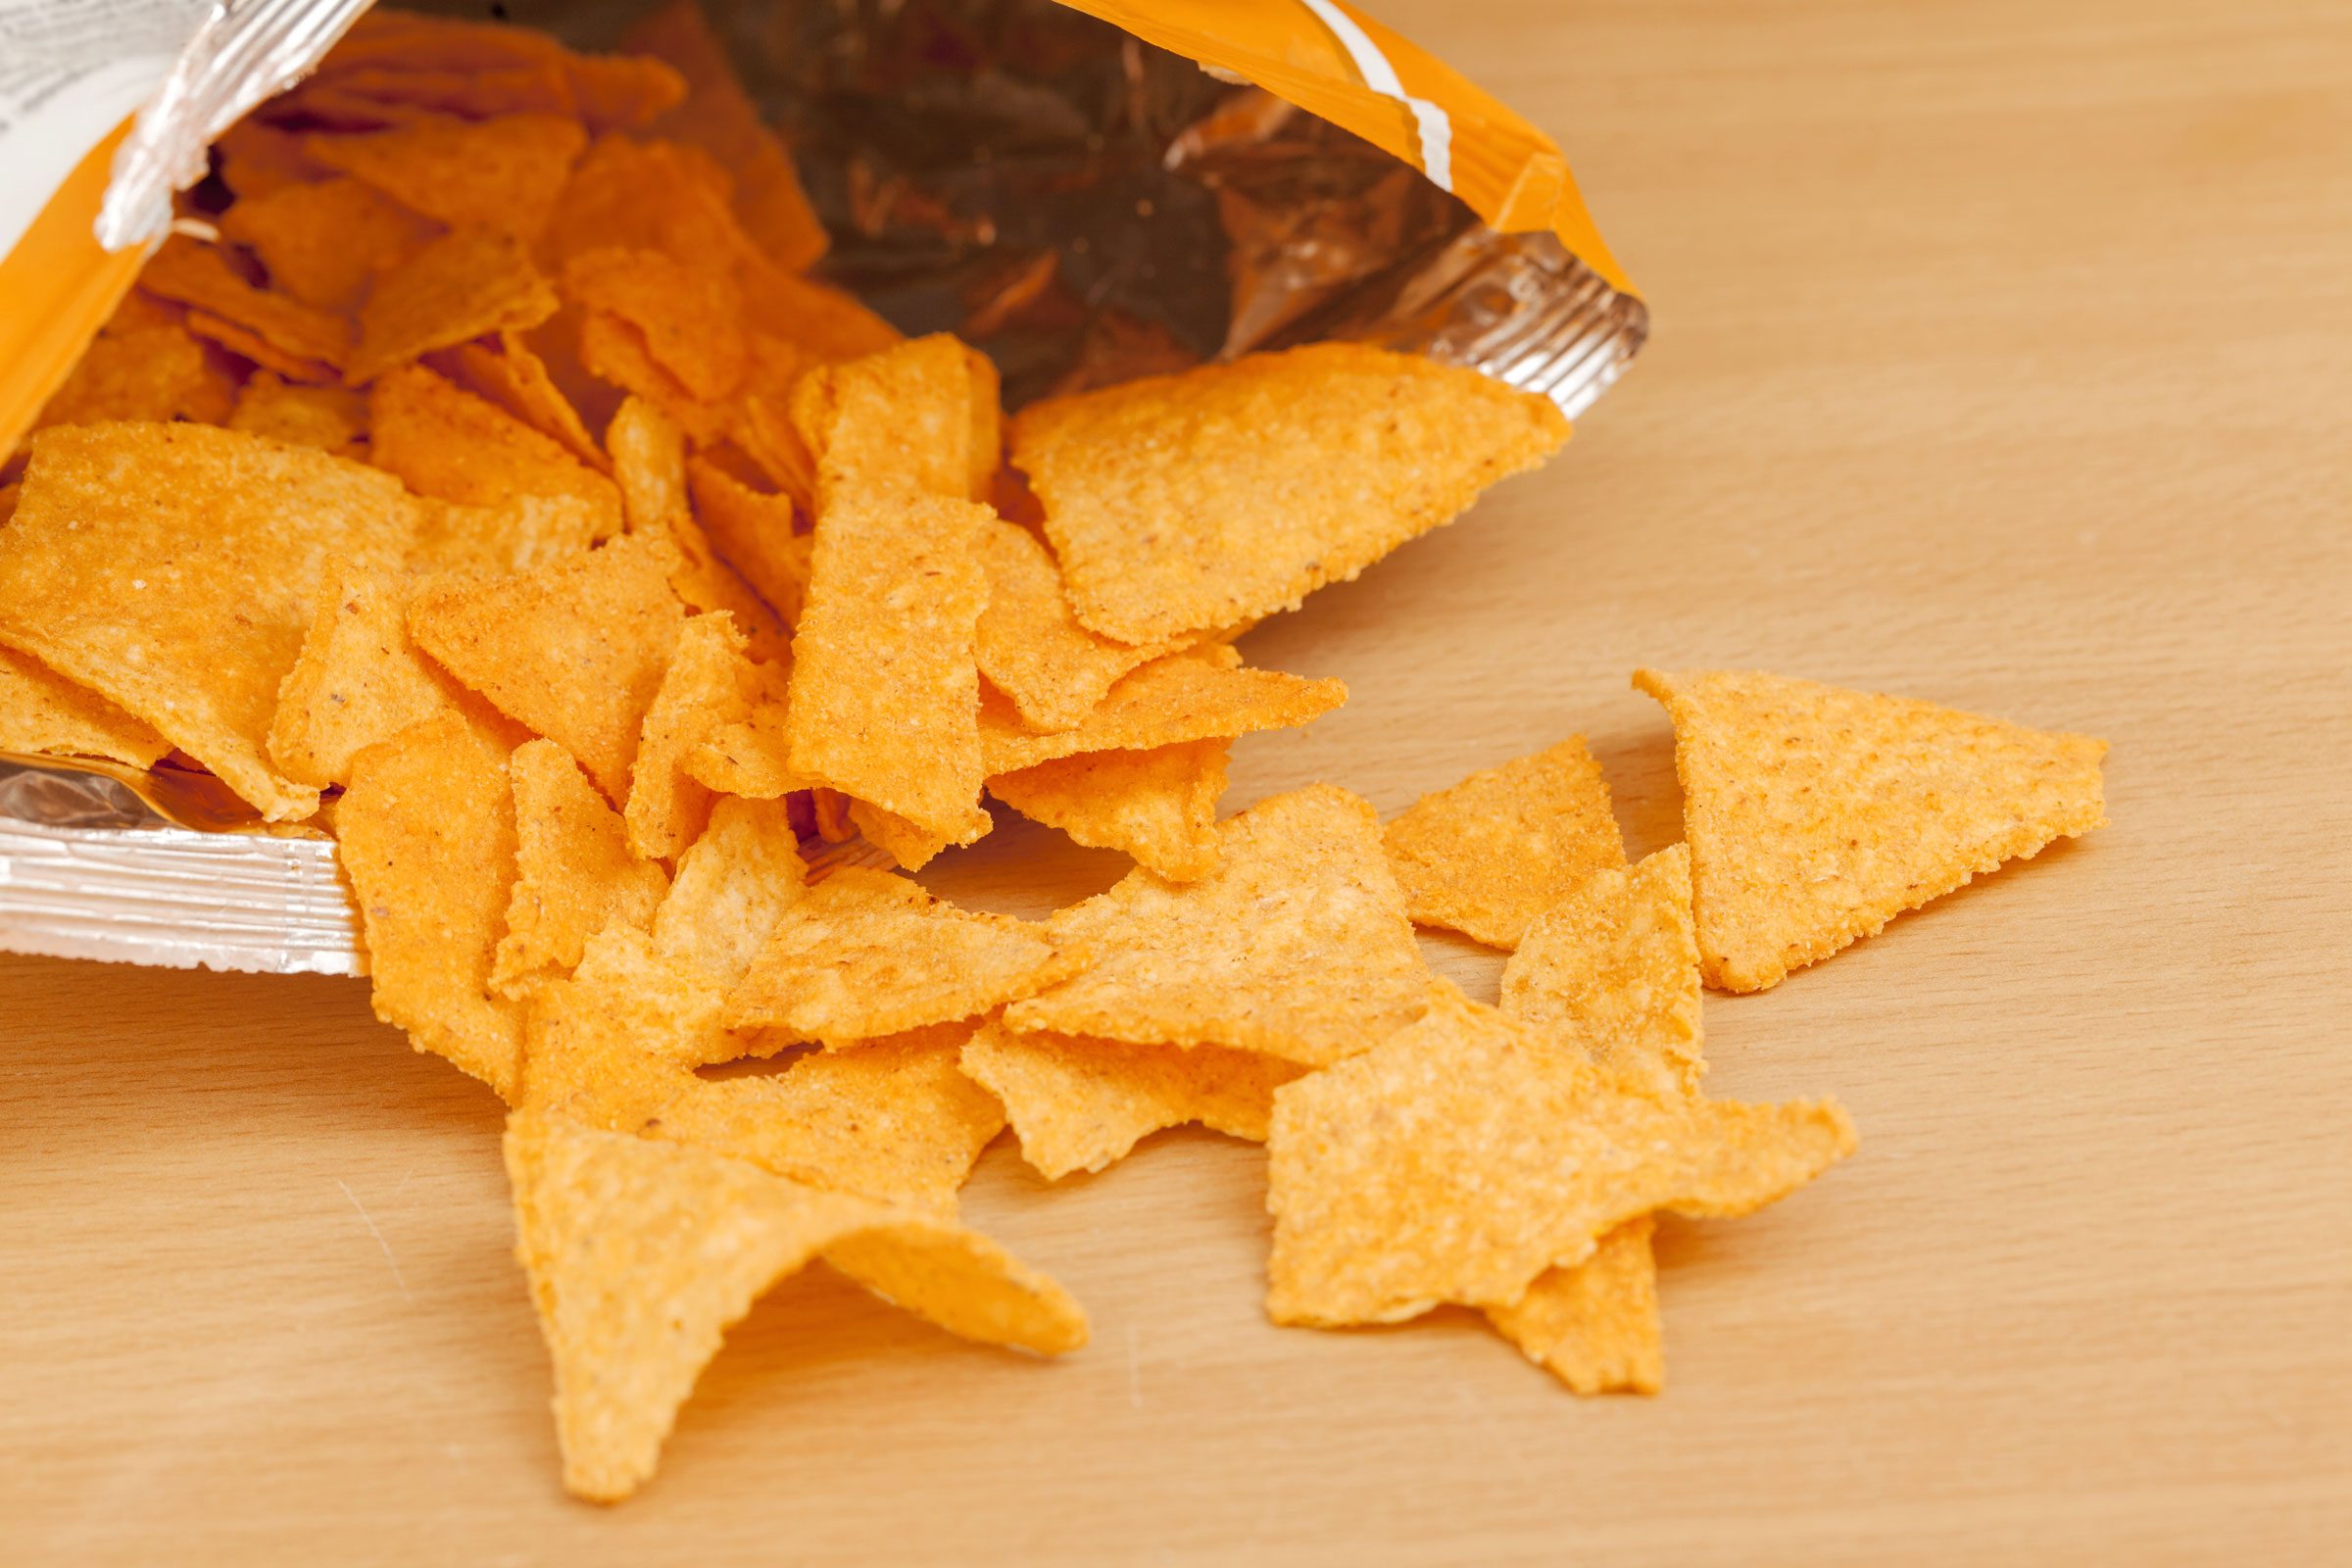 Off-Brand Doritos Taste Test: Which Ones Compare to the Real Deal?